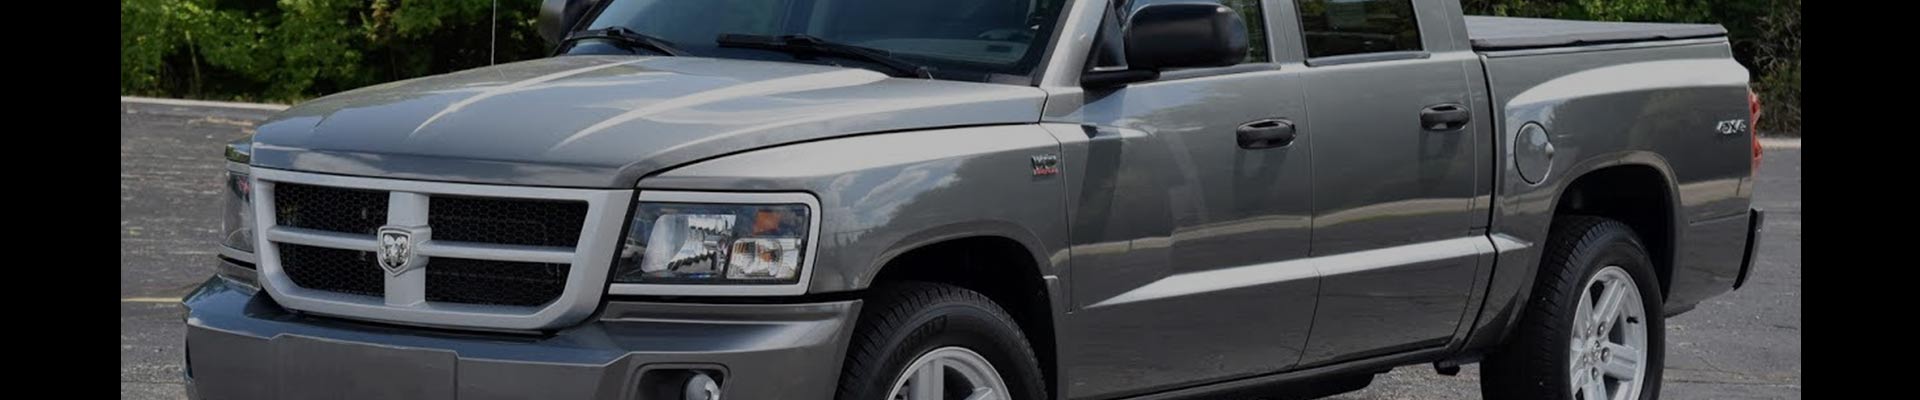 Shop Replacement and OEM 2011 Ram Dakota Parts with Discounted Price on the Net